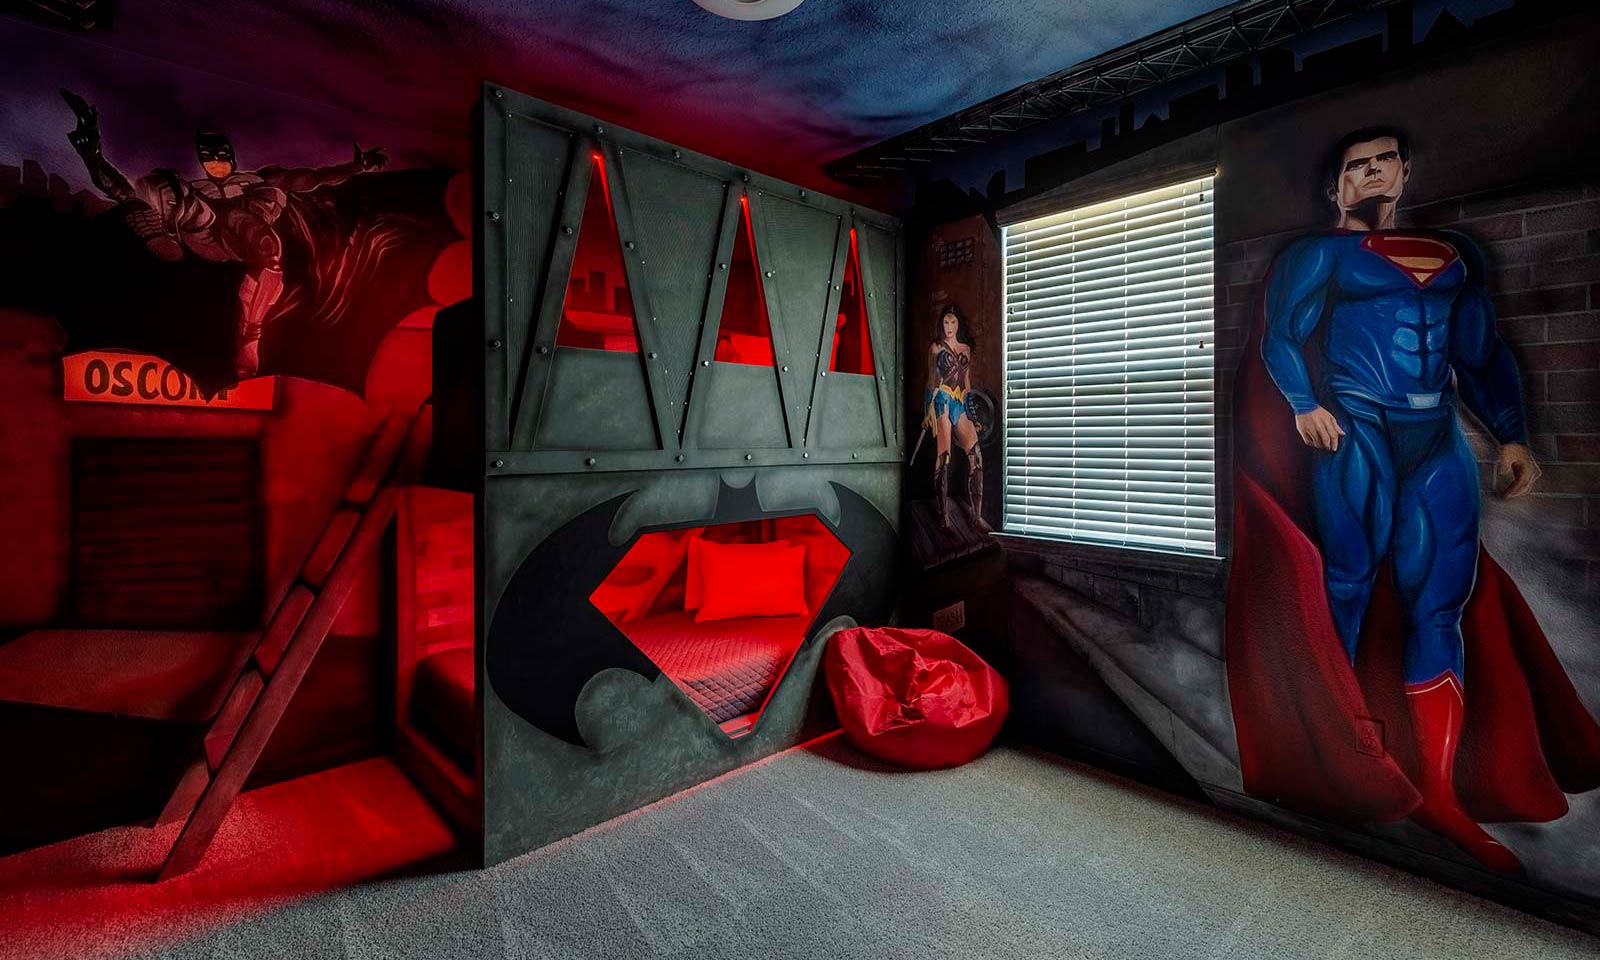 [amenities:Themed-Bedrooms:1] Themed Bedrooms